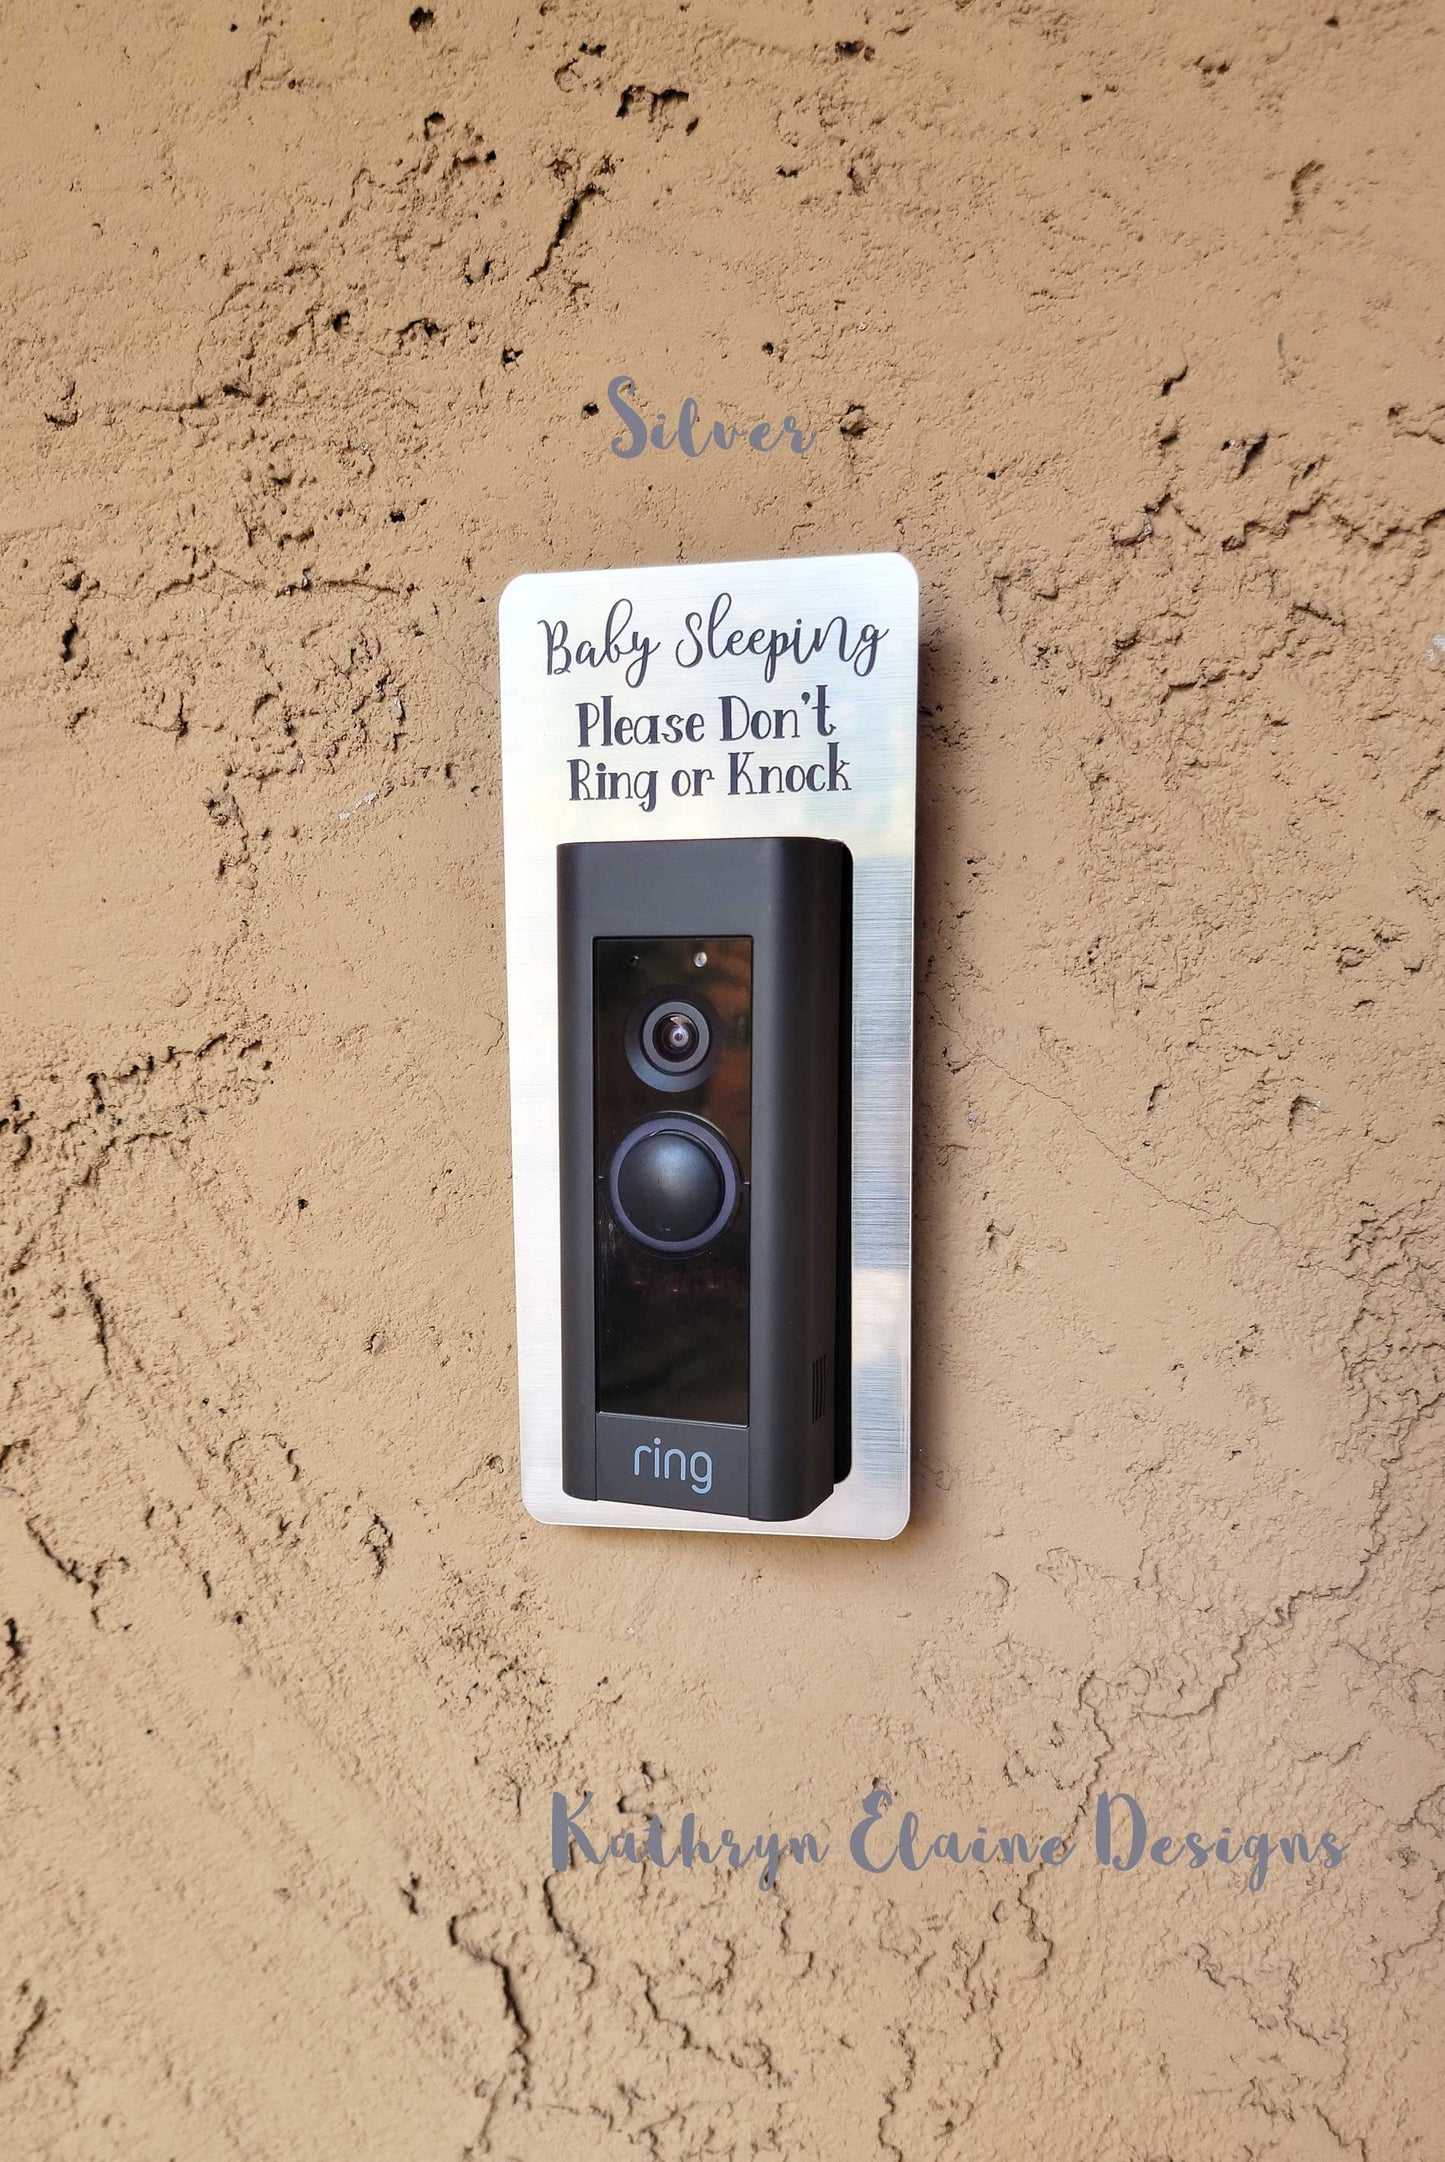 Silver laminate rectangle around Ring doorbell that says Baby Sleeping Please Don't Ring or Knock in black lettering against tan stucco background